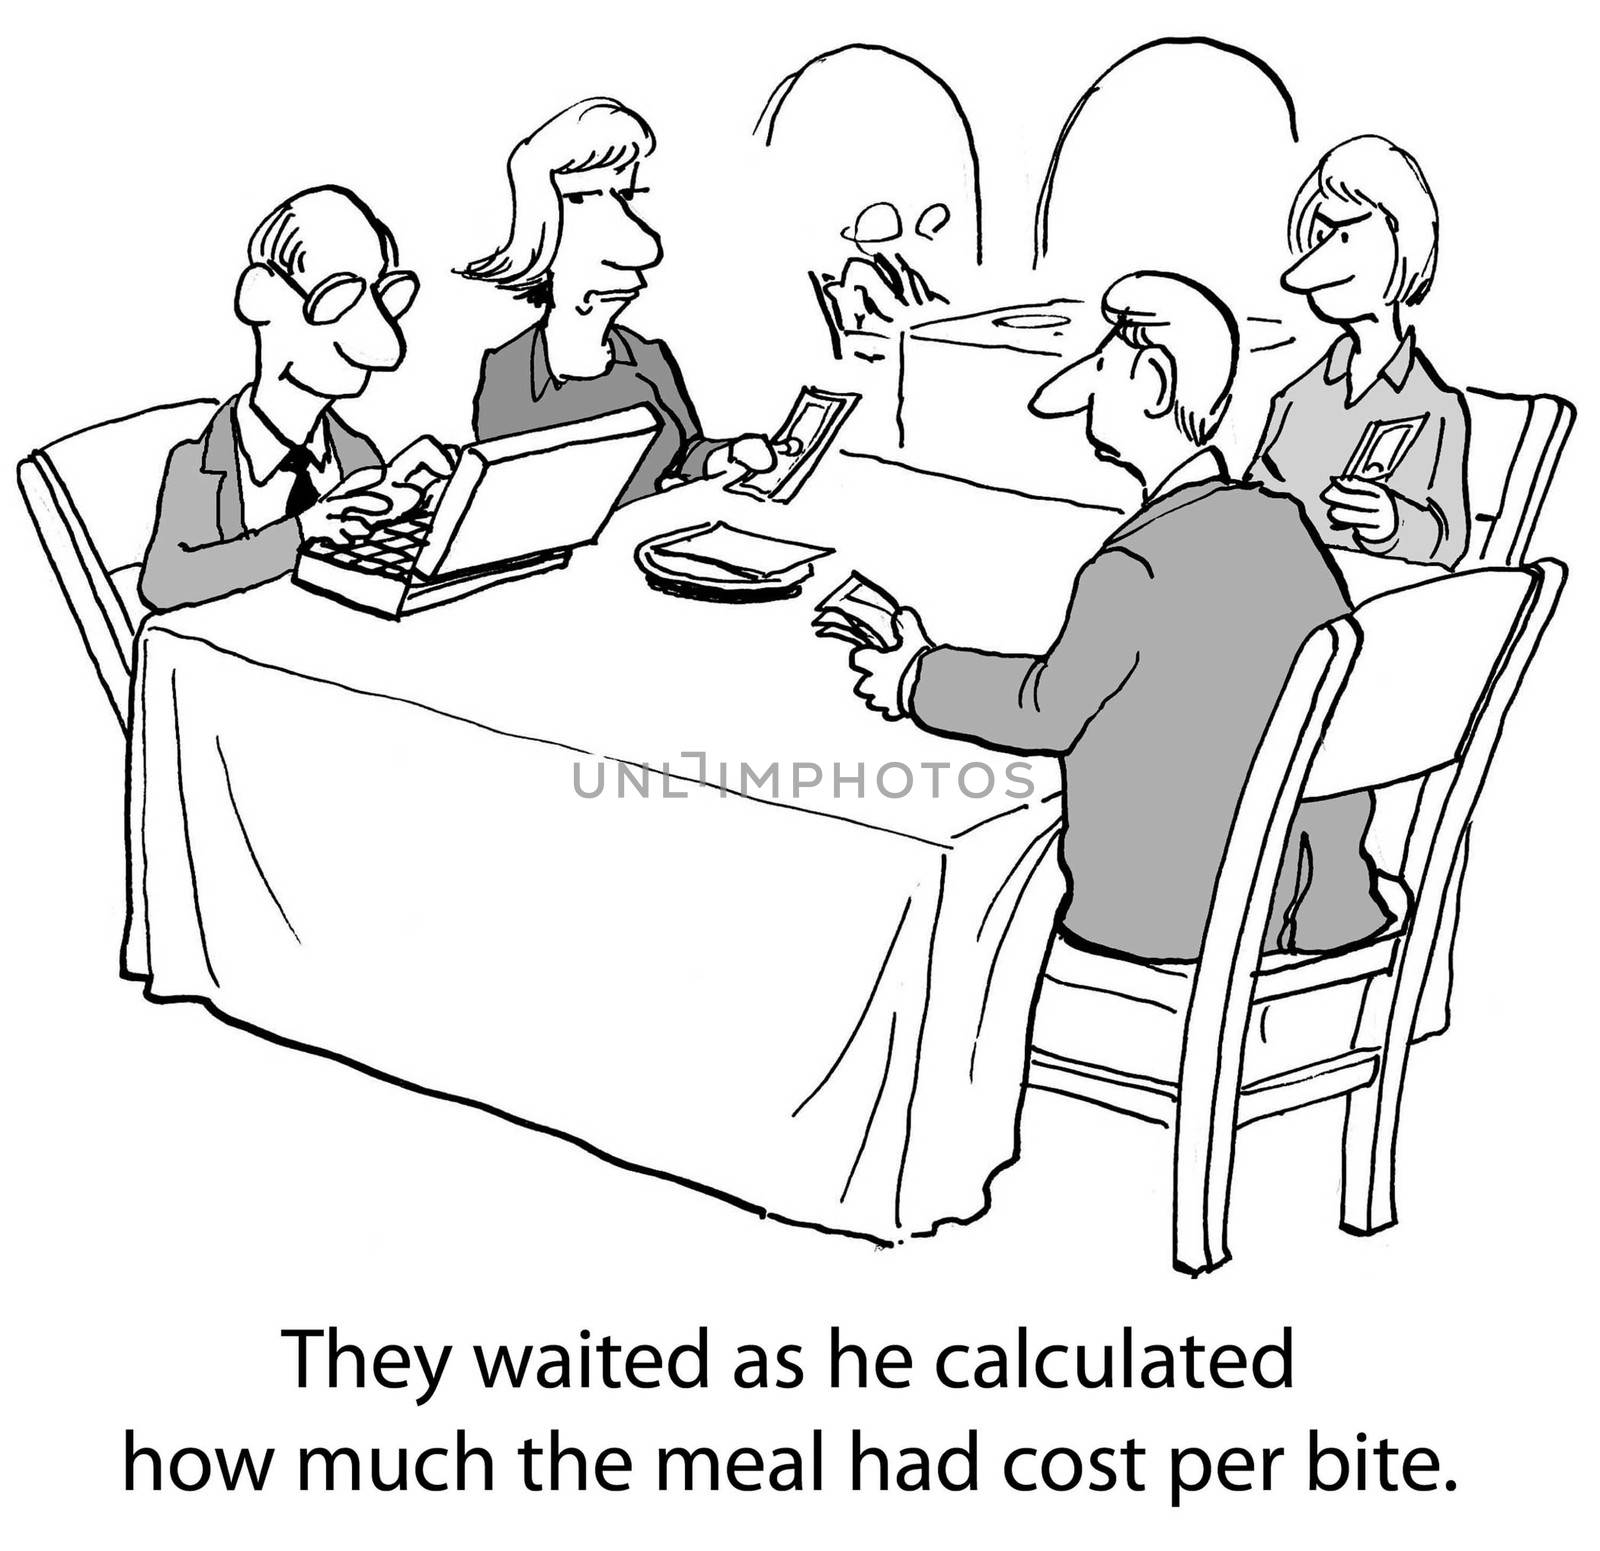 They waited as he carefully calculated how much the meal had cost per bite.